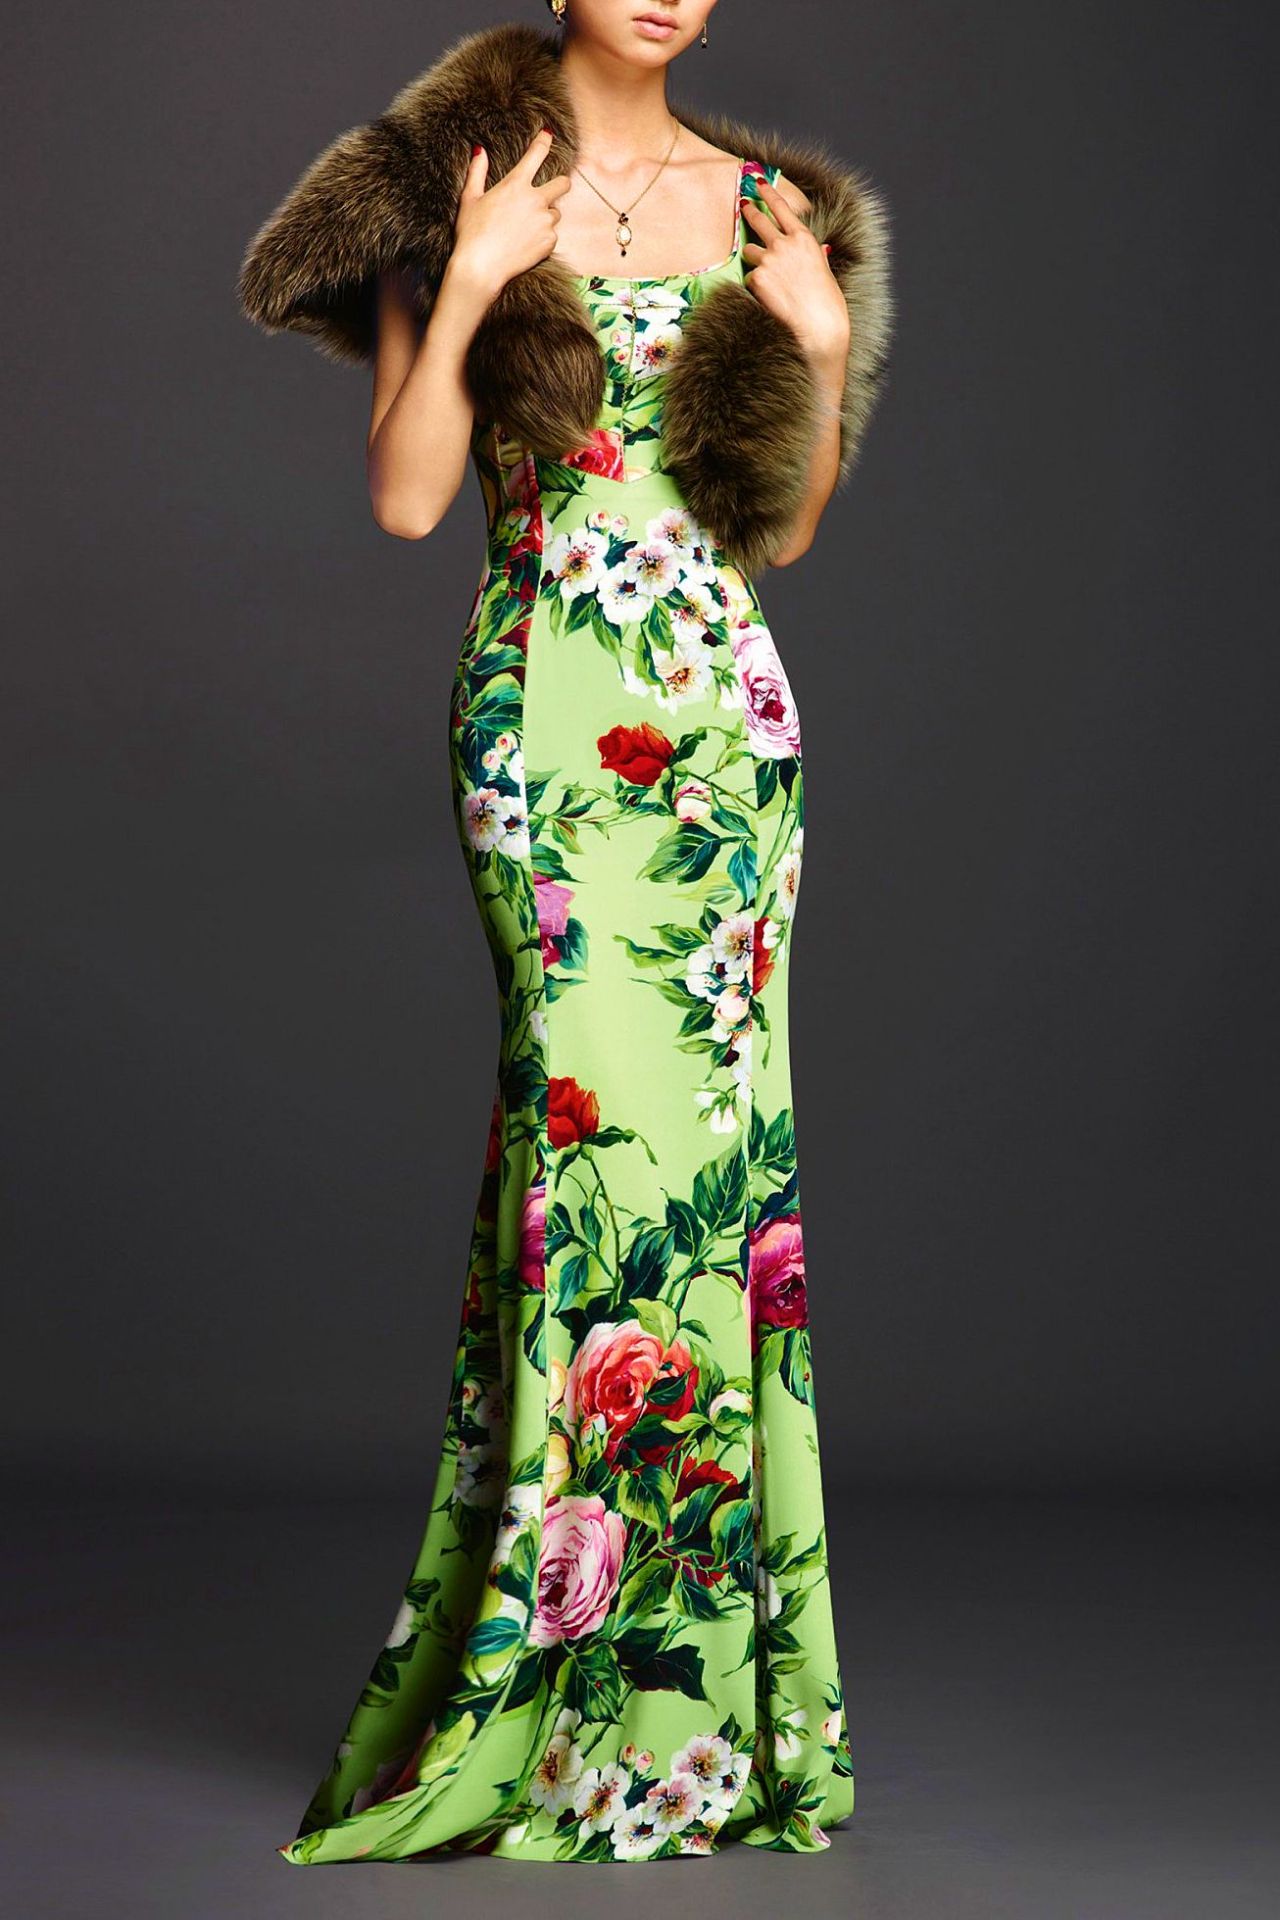 BEAUTIFUL FLORAL GOWNS